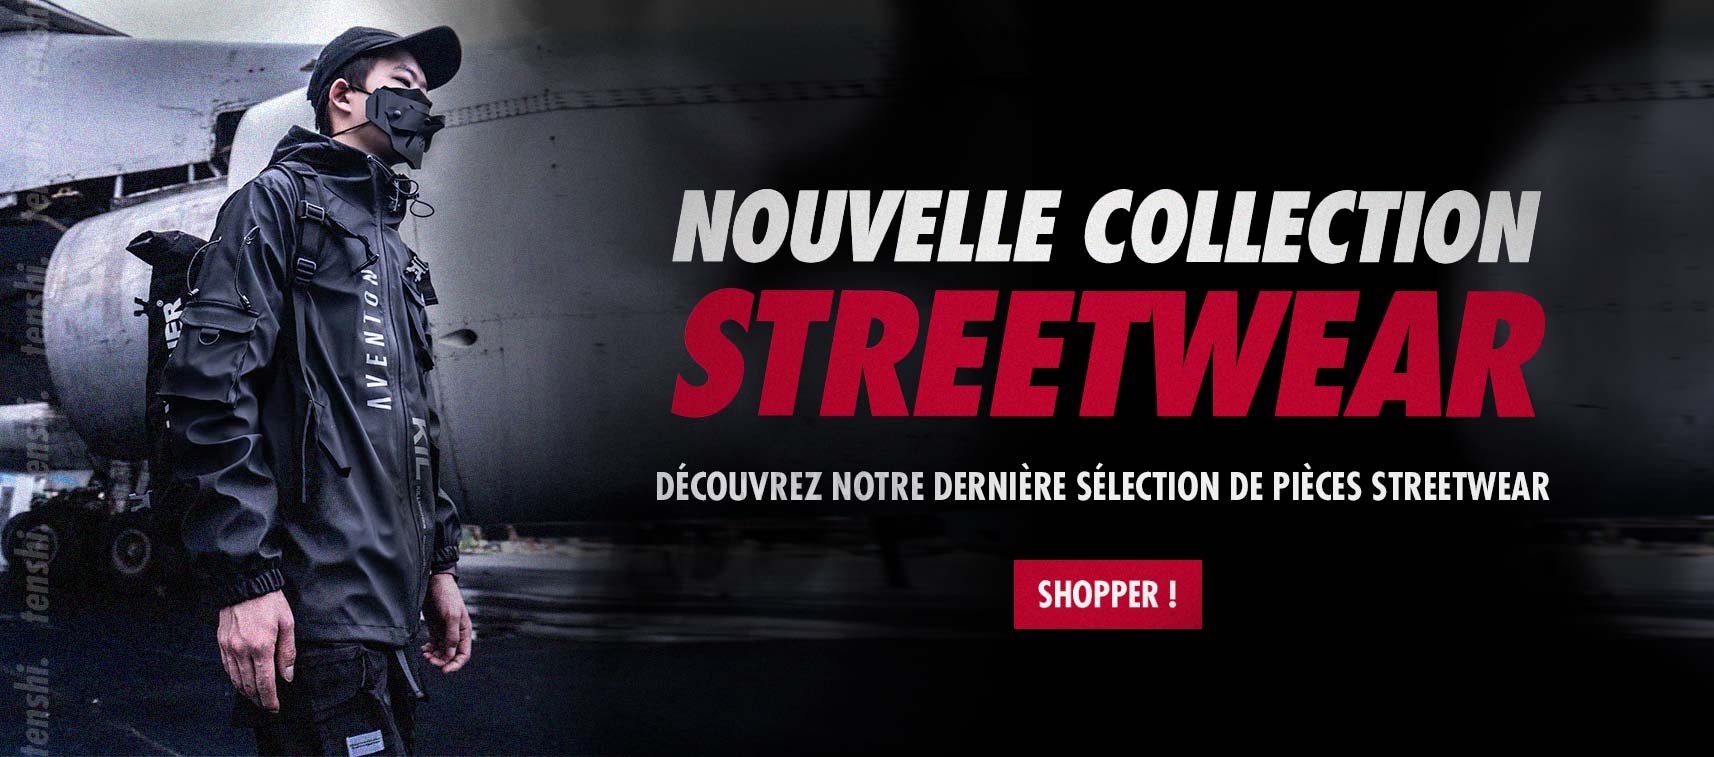 tenshi streetwear - nouvelle collection